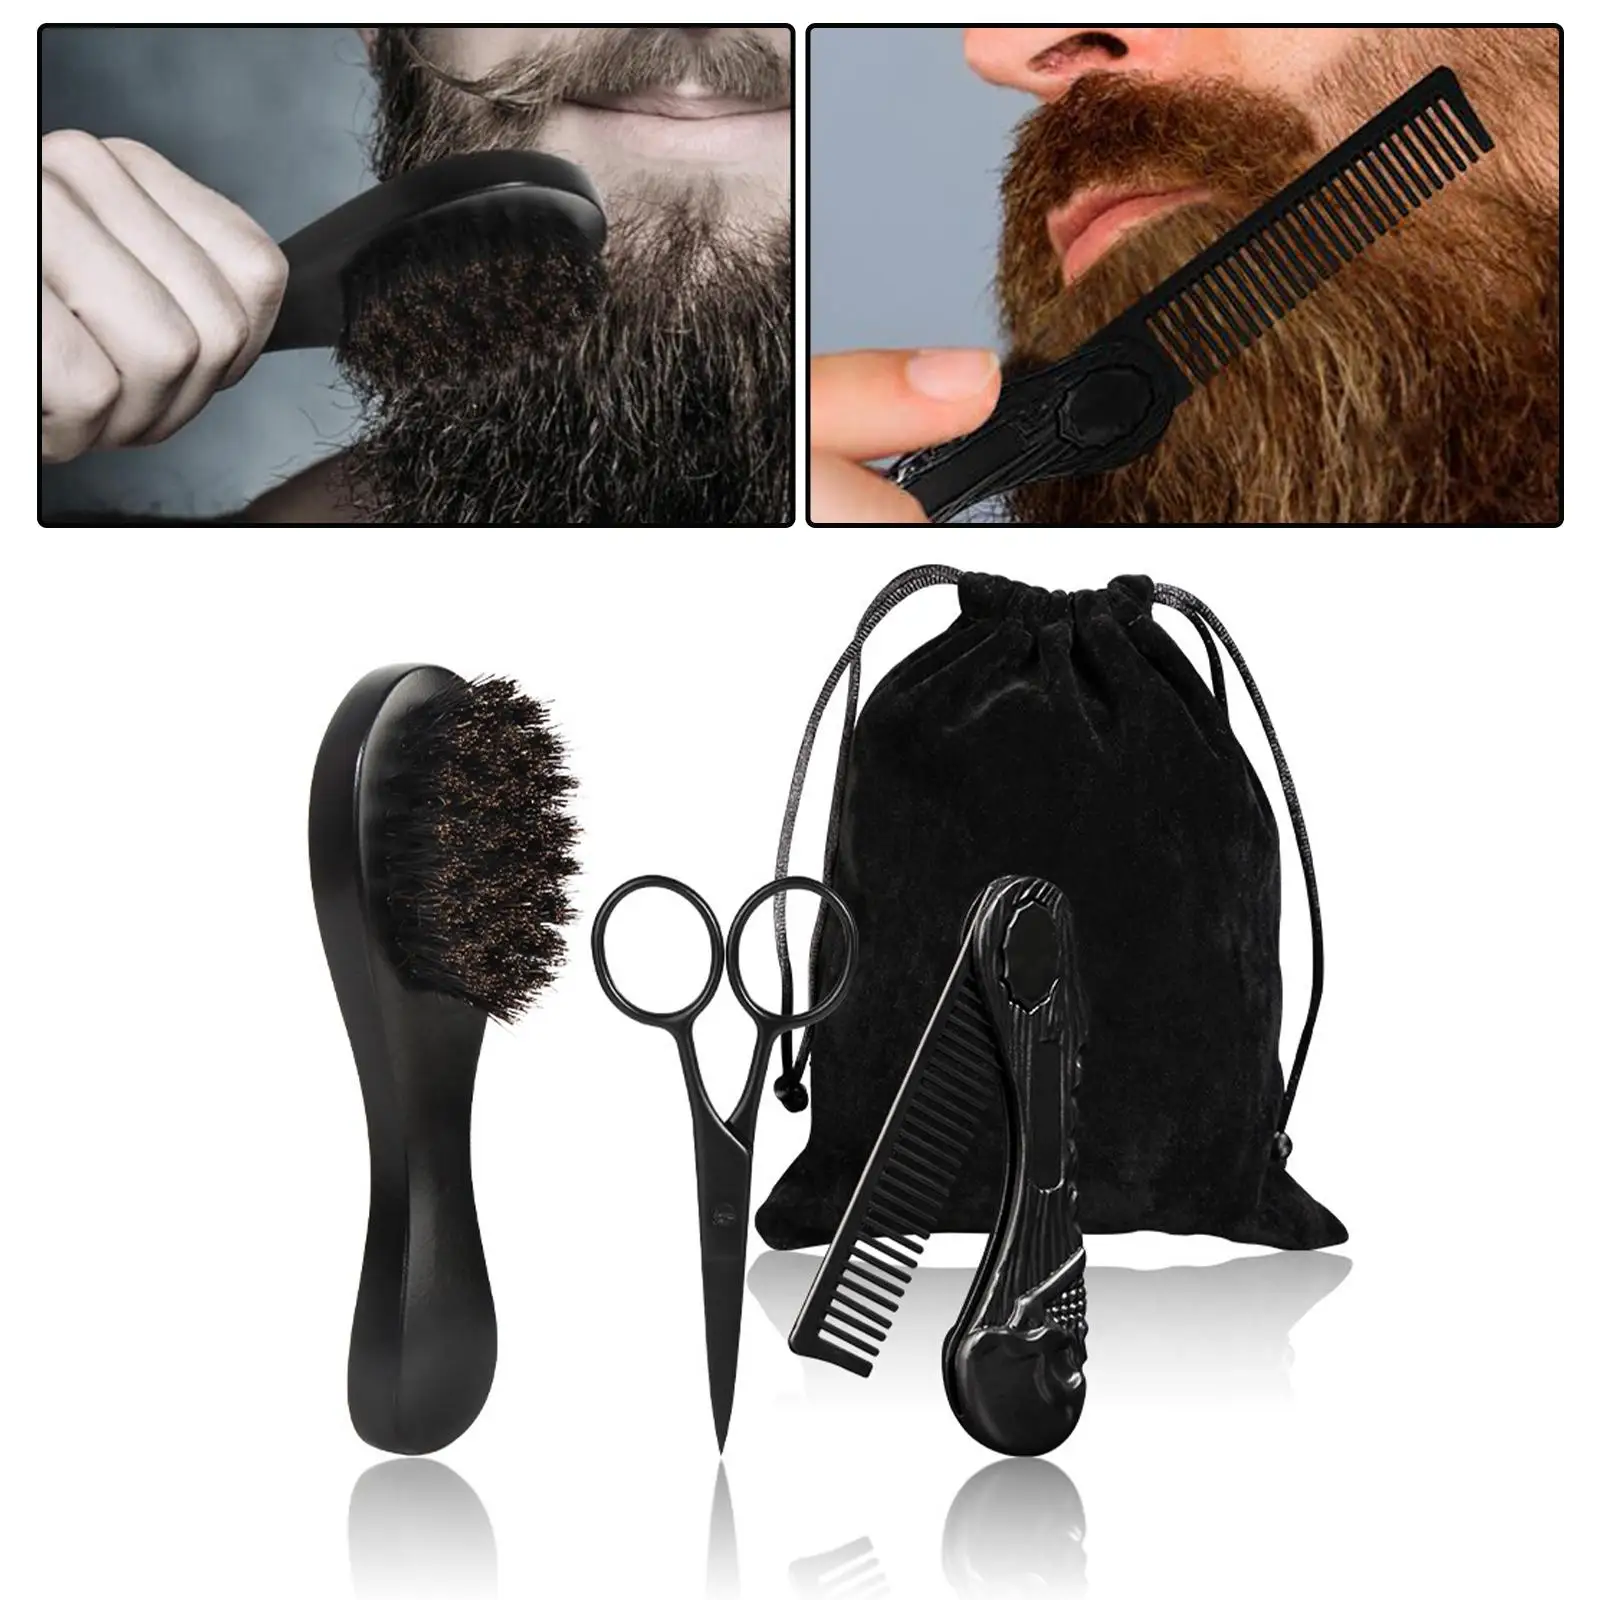 3x Professional Beard , Gift Wooden Pocket Comb Mustache Scissors with Dustproof Bag for Travel Men Cleaning Grooming Tool.